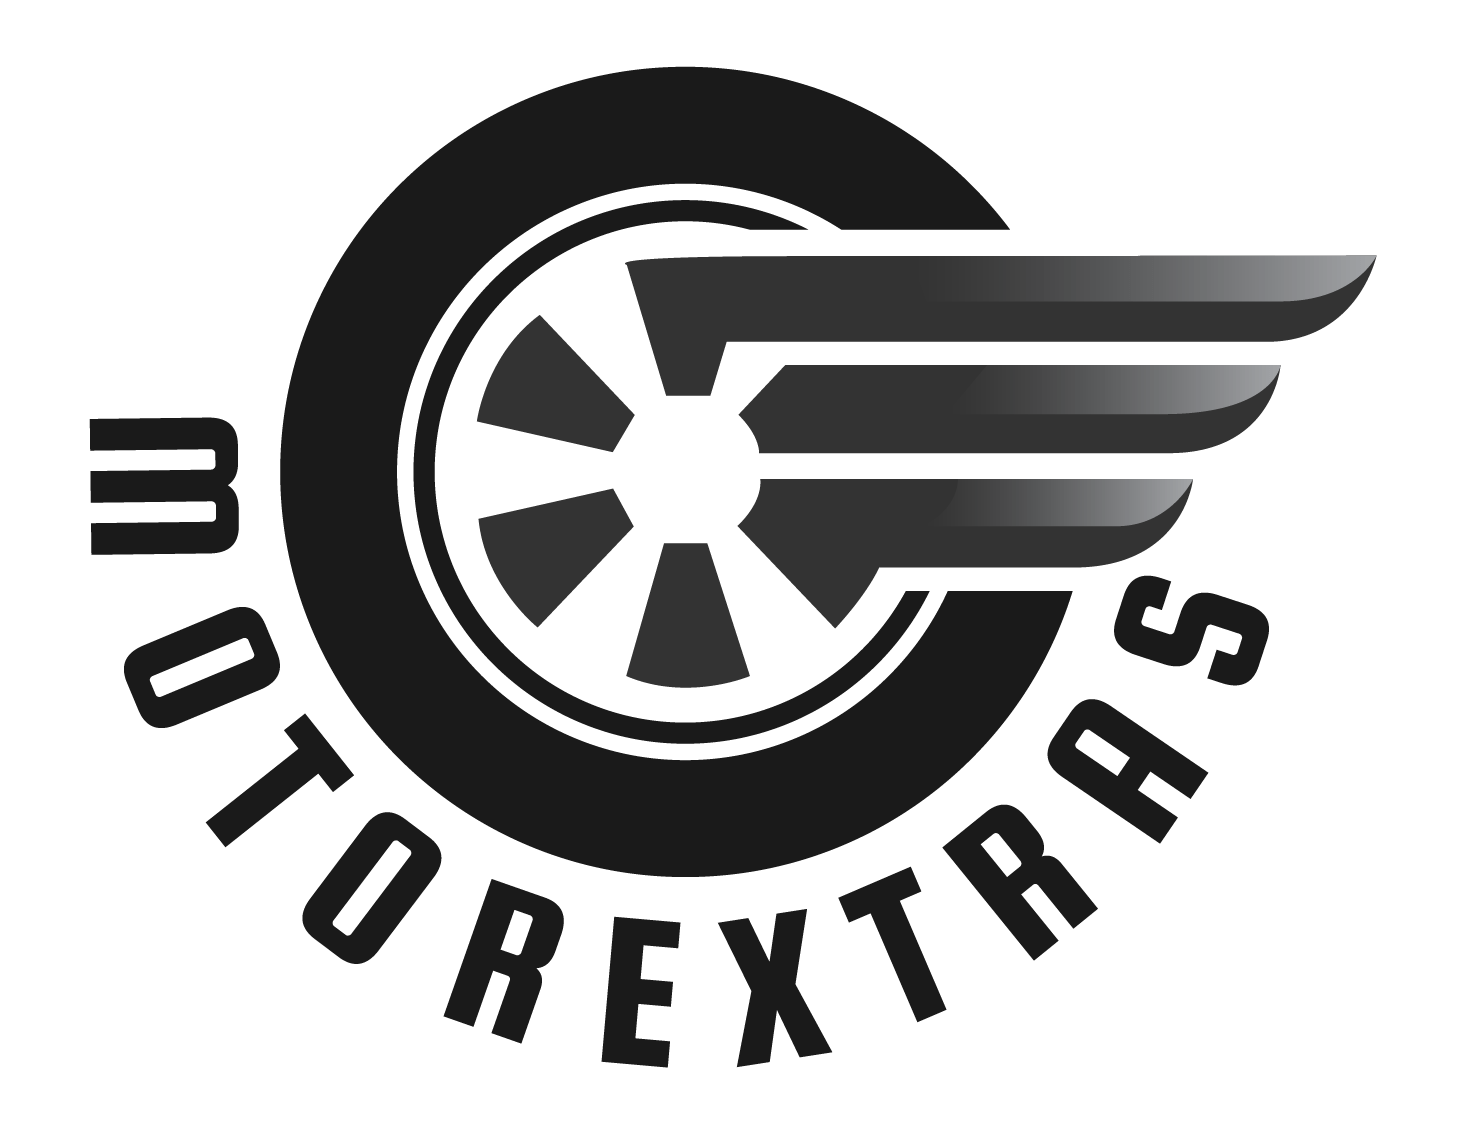 MotorExtras is an online resource providing you expert advice on repair, service, maintenance, guides, reviews which related to various vehicles. We also share our experience we gained through the years to improve the functionality of your vehicle and enhance your driving experience.